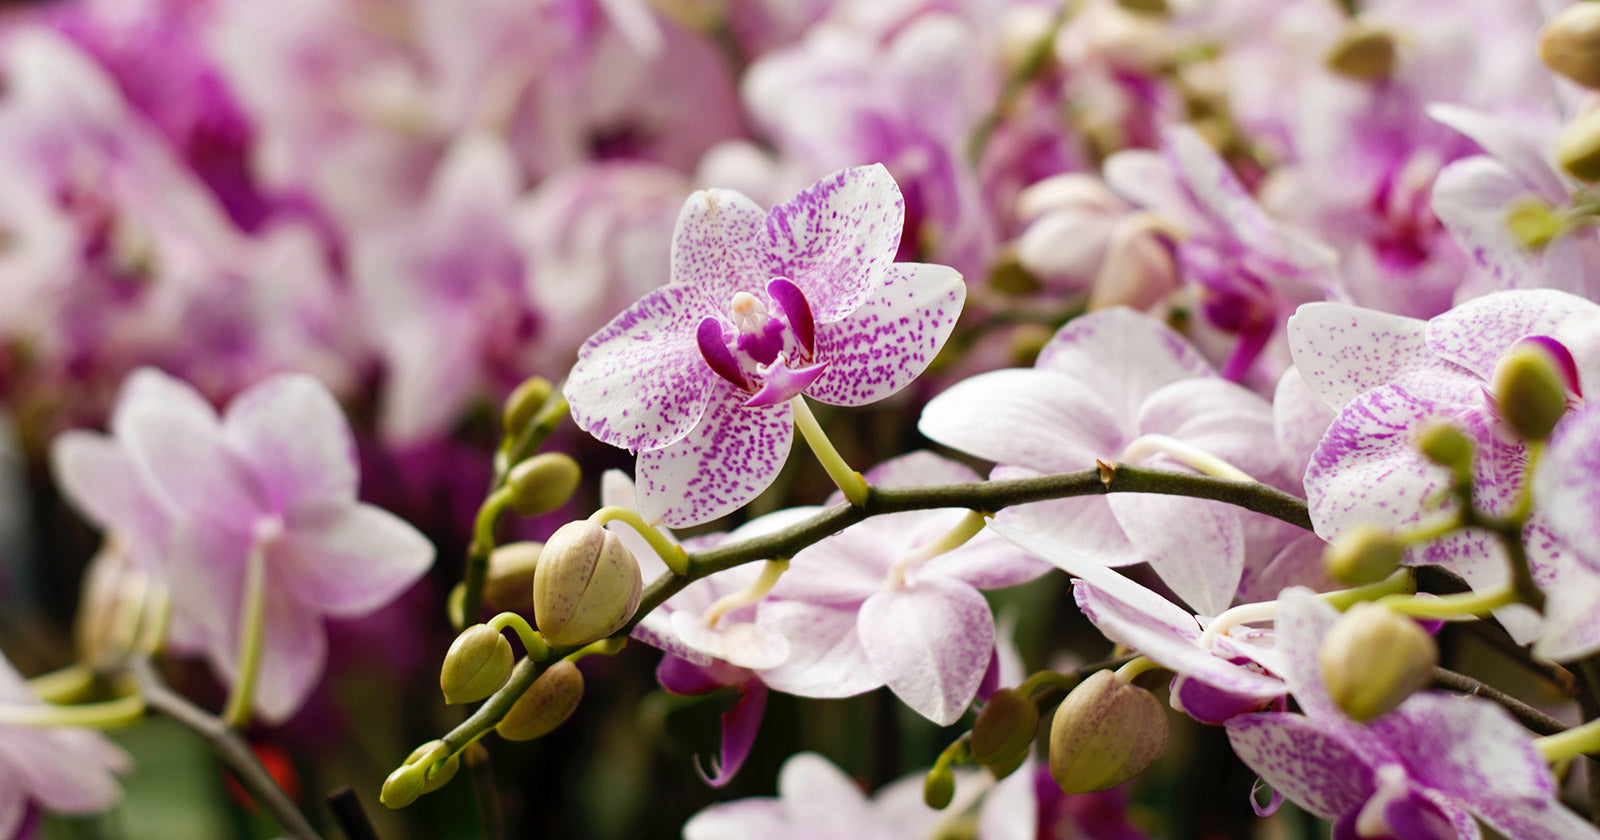 Blooming Heritage: Singapore's National Flower, the Orchid